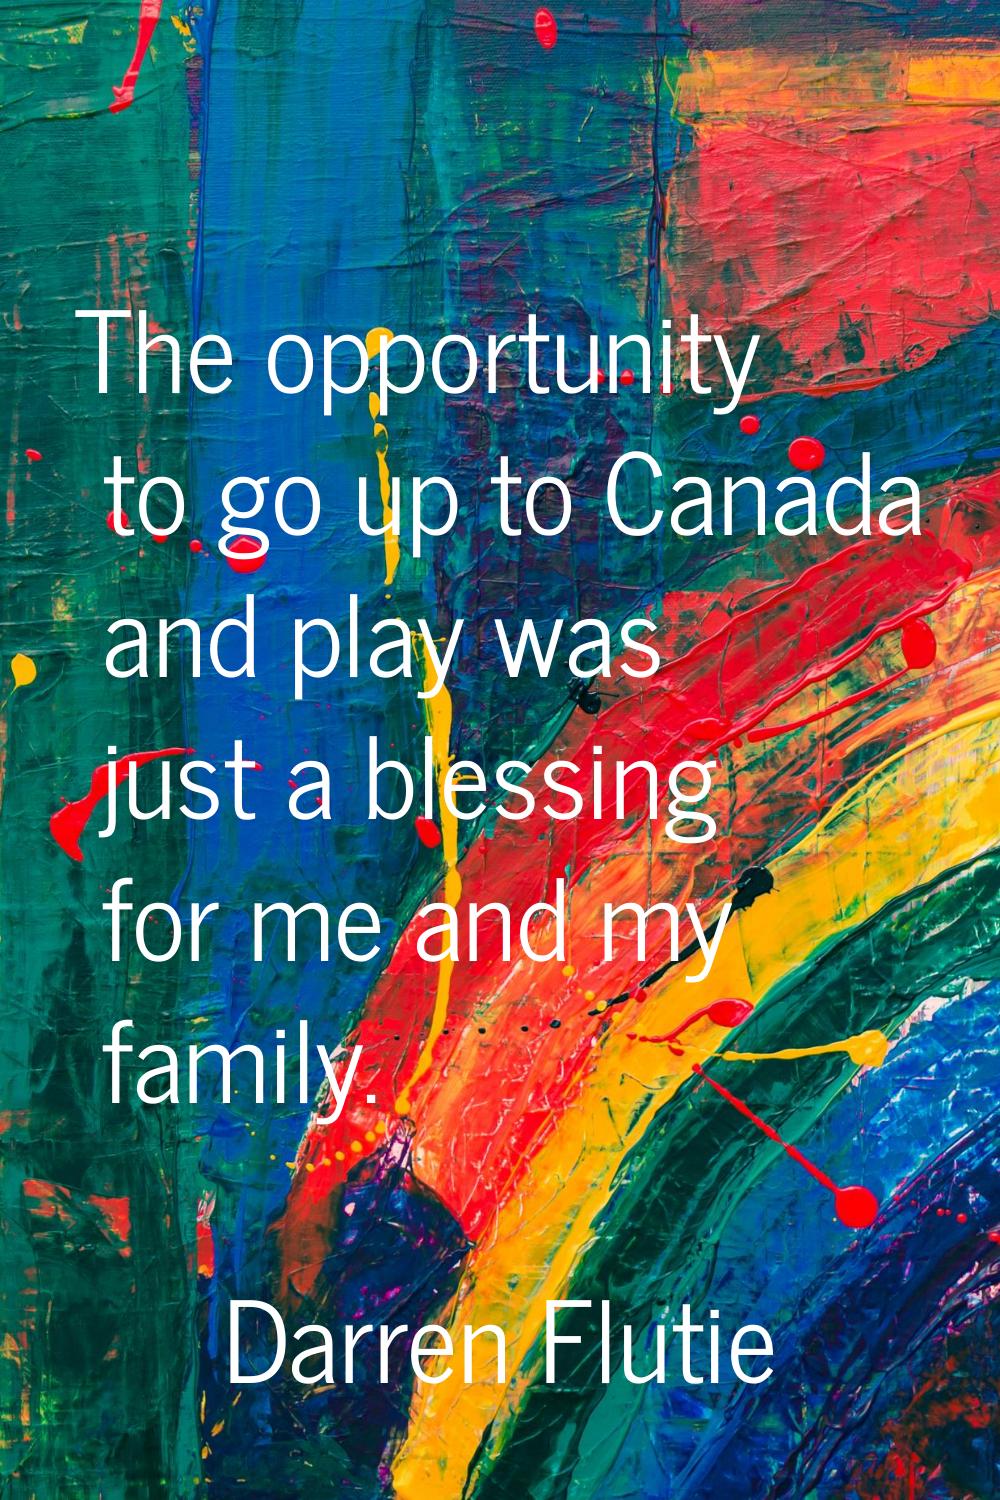 The opportunity to go up to Canada and play was just a blessing for me and my family.